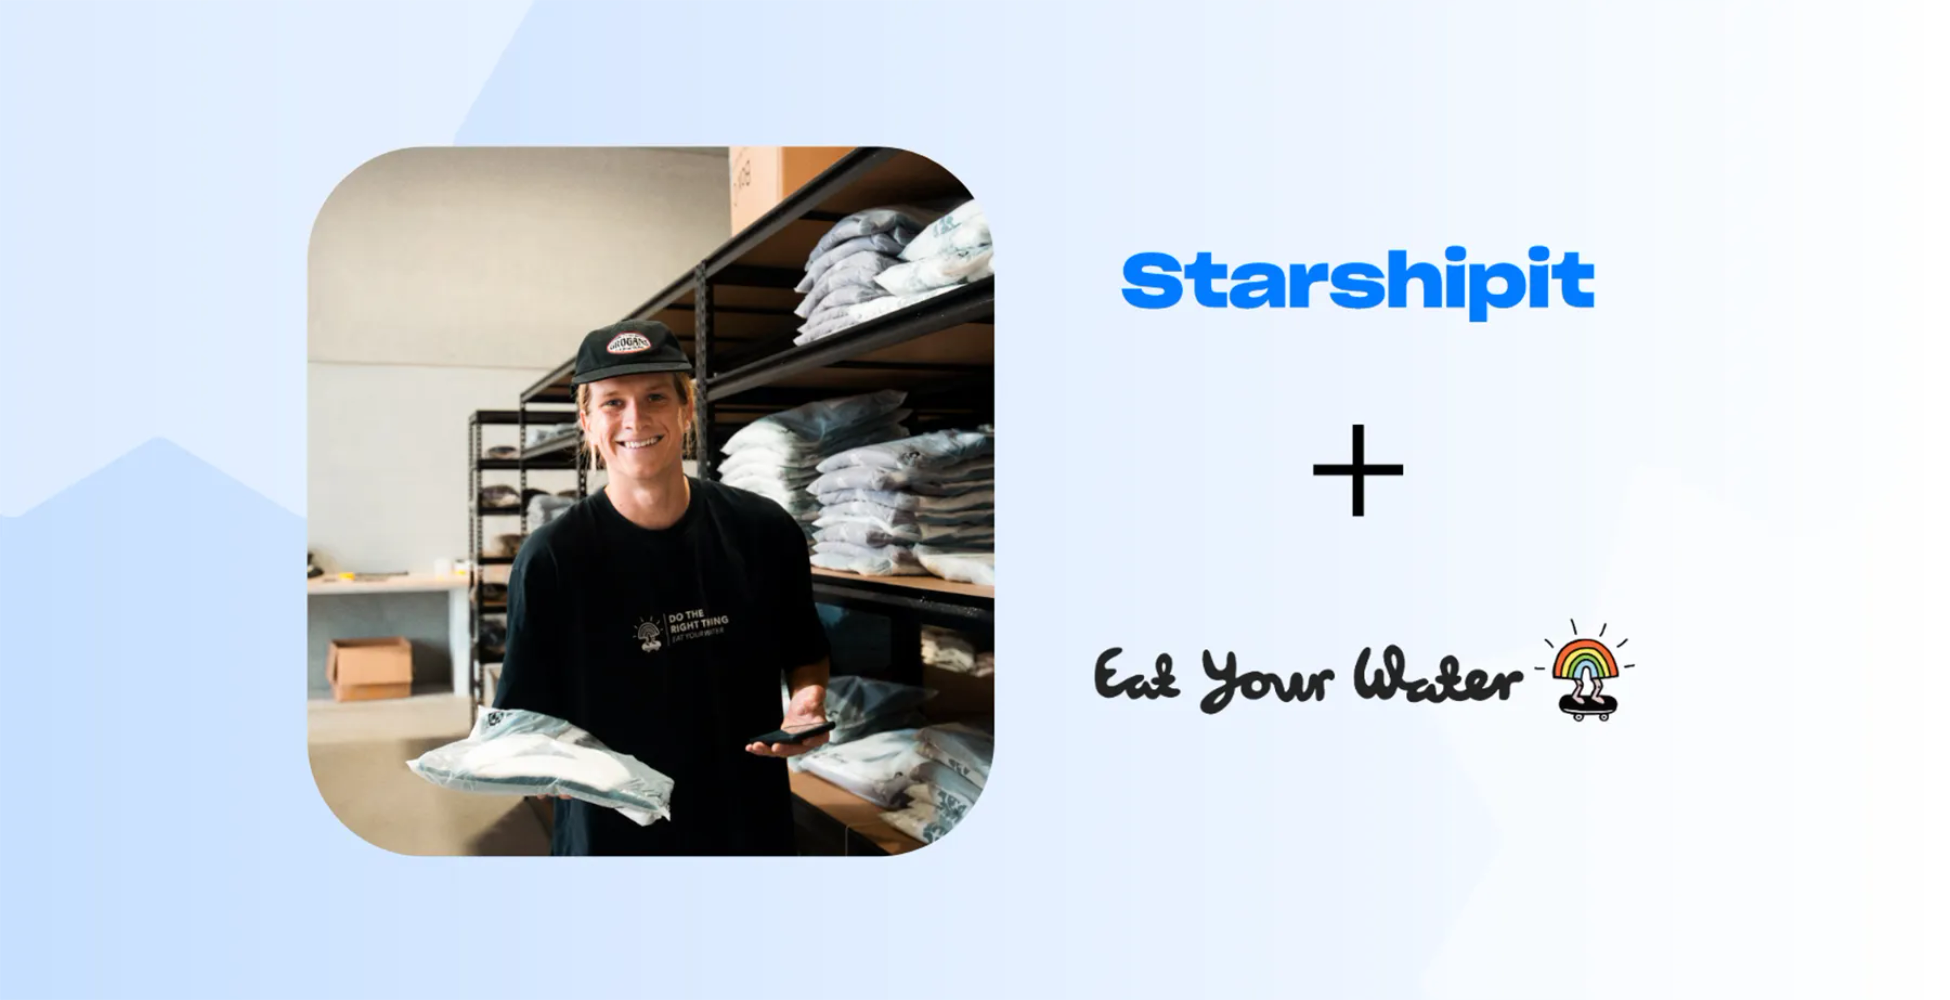 Starshipit and Eat Your Water case study